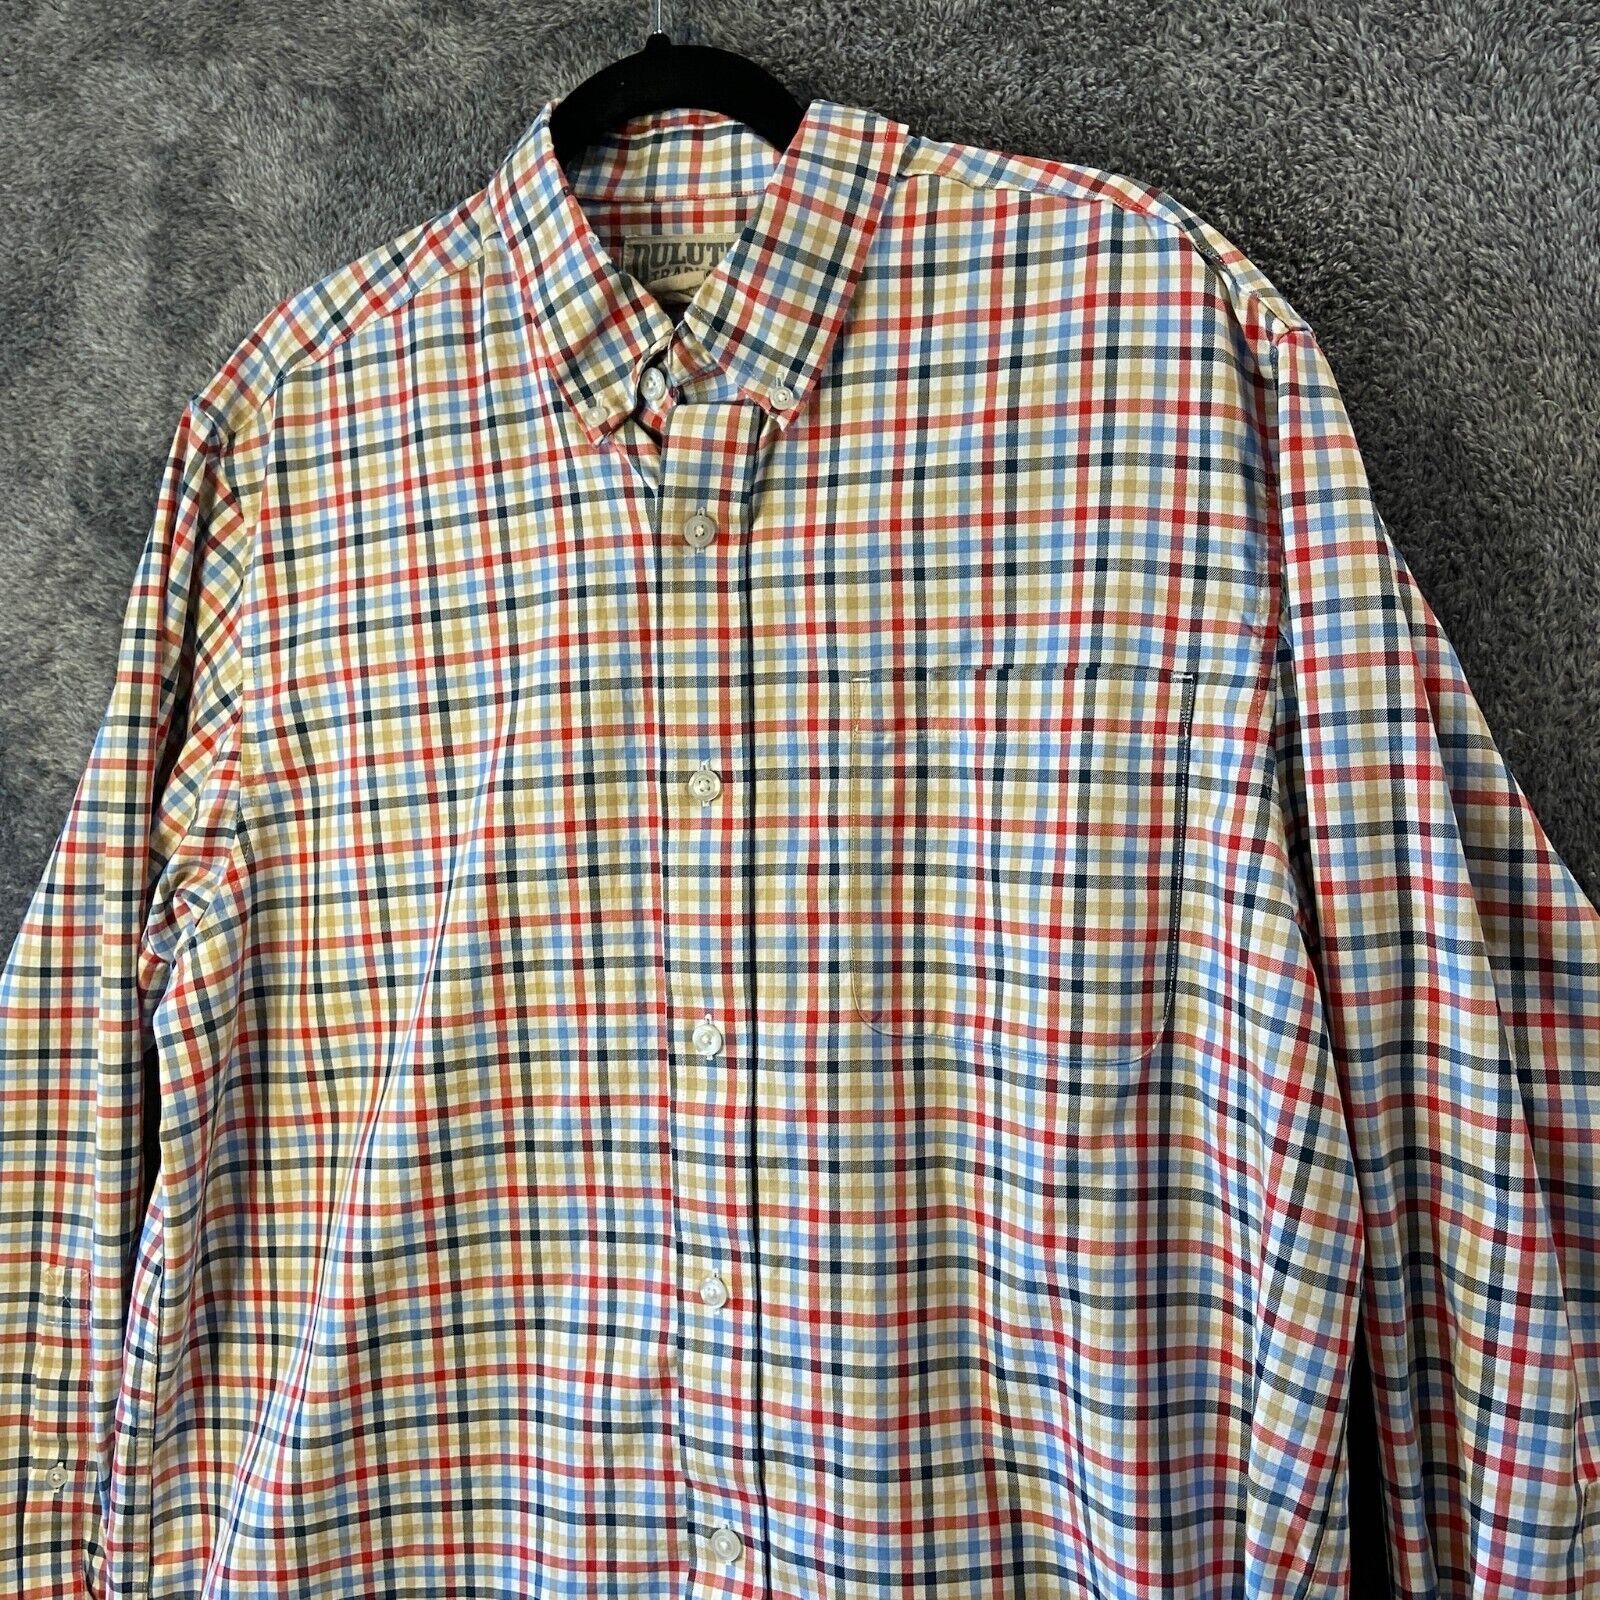 Primary image for Duluth Trading Button Up Shirt Mens Large Plaid Work Longsleeve Outdoors Casual